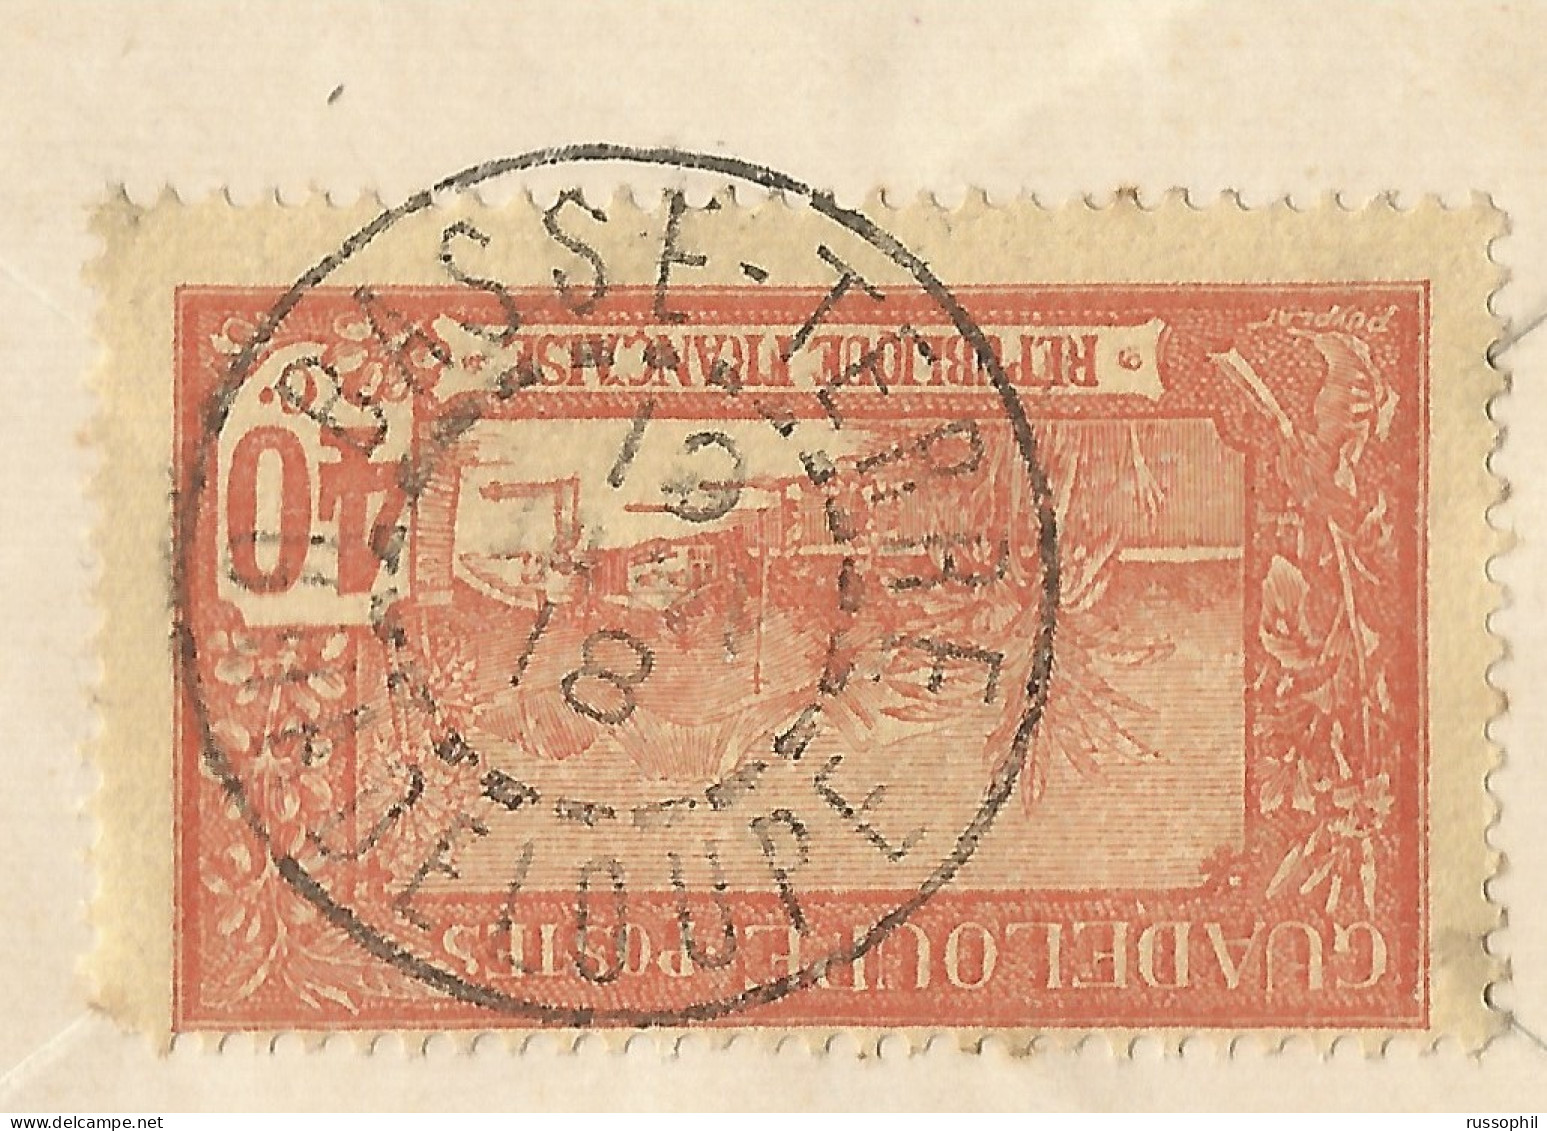 GUADELOUPE - 40 CENT. (Yv. #65 ALONE) FRANKING ON REGISTRED COVER FROM BASSE-TERRE TO PARIS - FRENCH SEA POST - 1918 - Covers & Documents